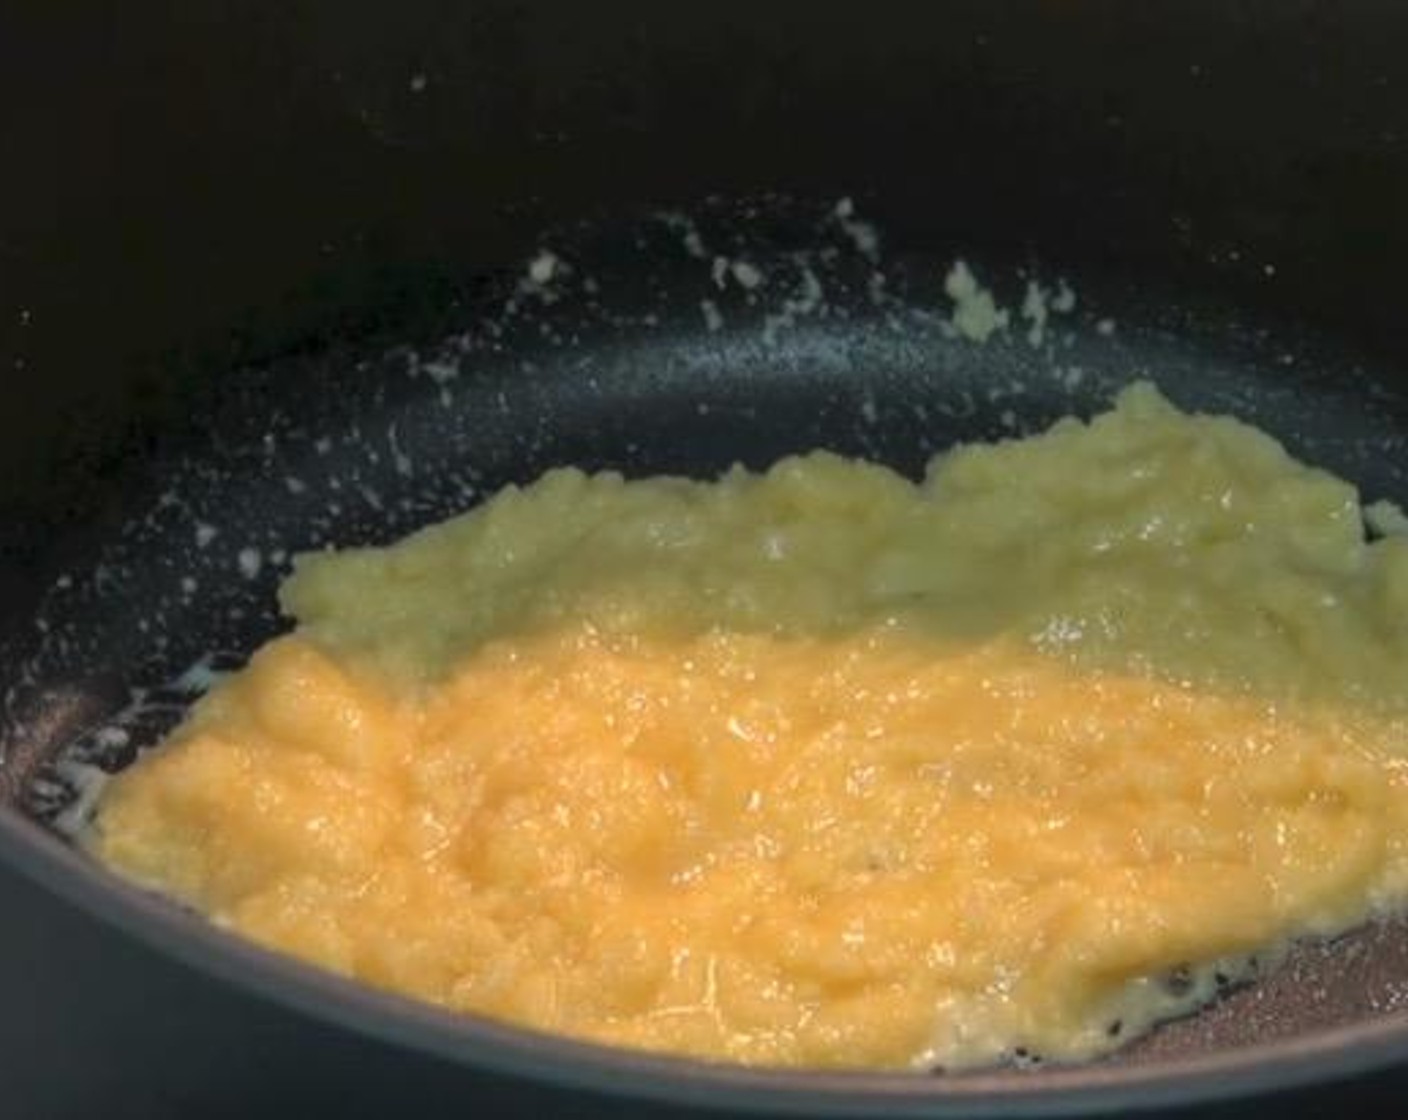 step 2 In a saucepan over medium heat, allow Butter (2 Tbsp) to melt. Add All-Purpose Flour (1/4 cup) and cook for 2 minutes, or until the mixture starts to bubble up. Take it off the heat.